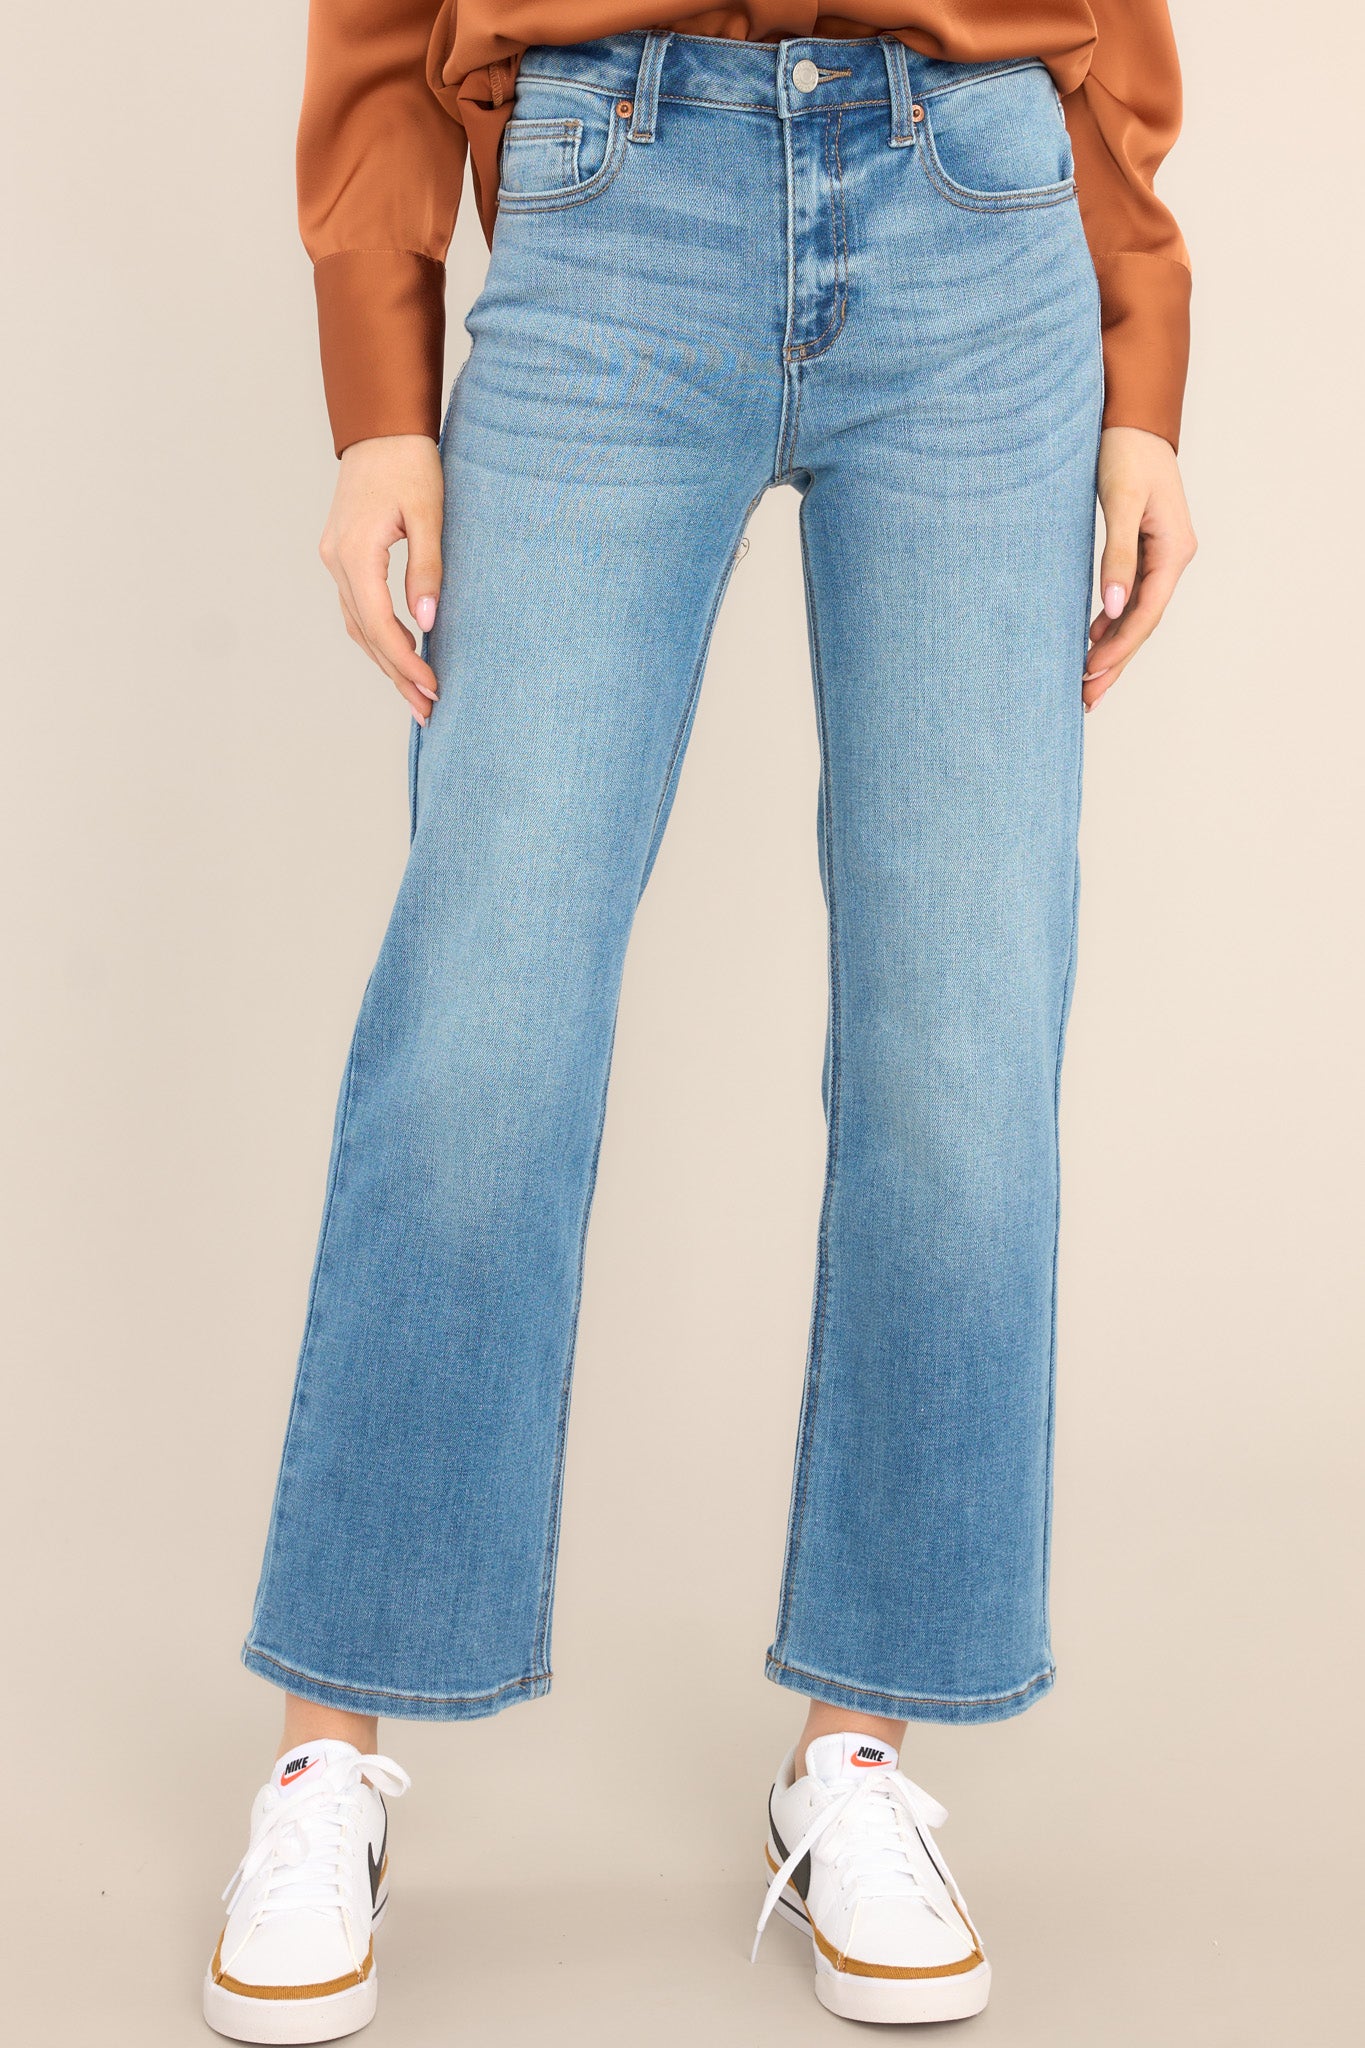 These medium wash jeans feature a high waist design, a zipper and button closure, functional belt loops and pockets, and a straight leg.